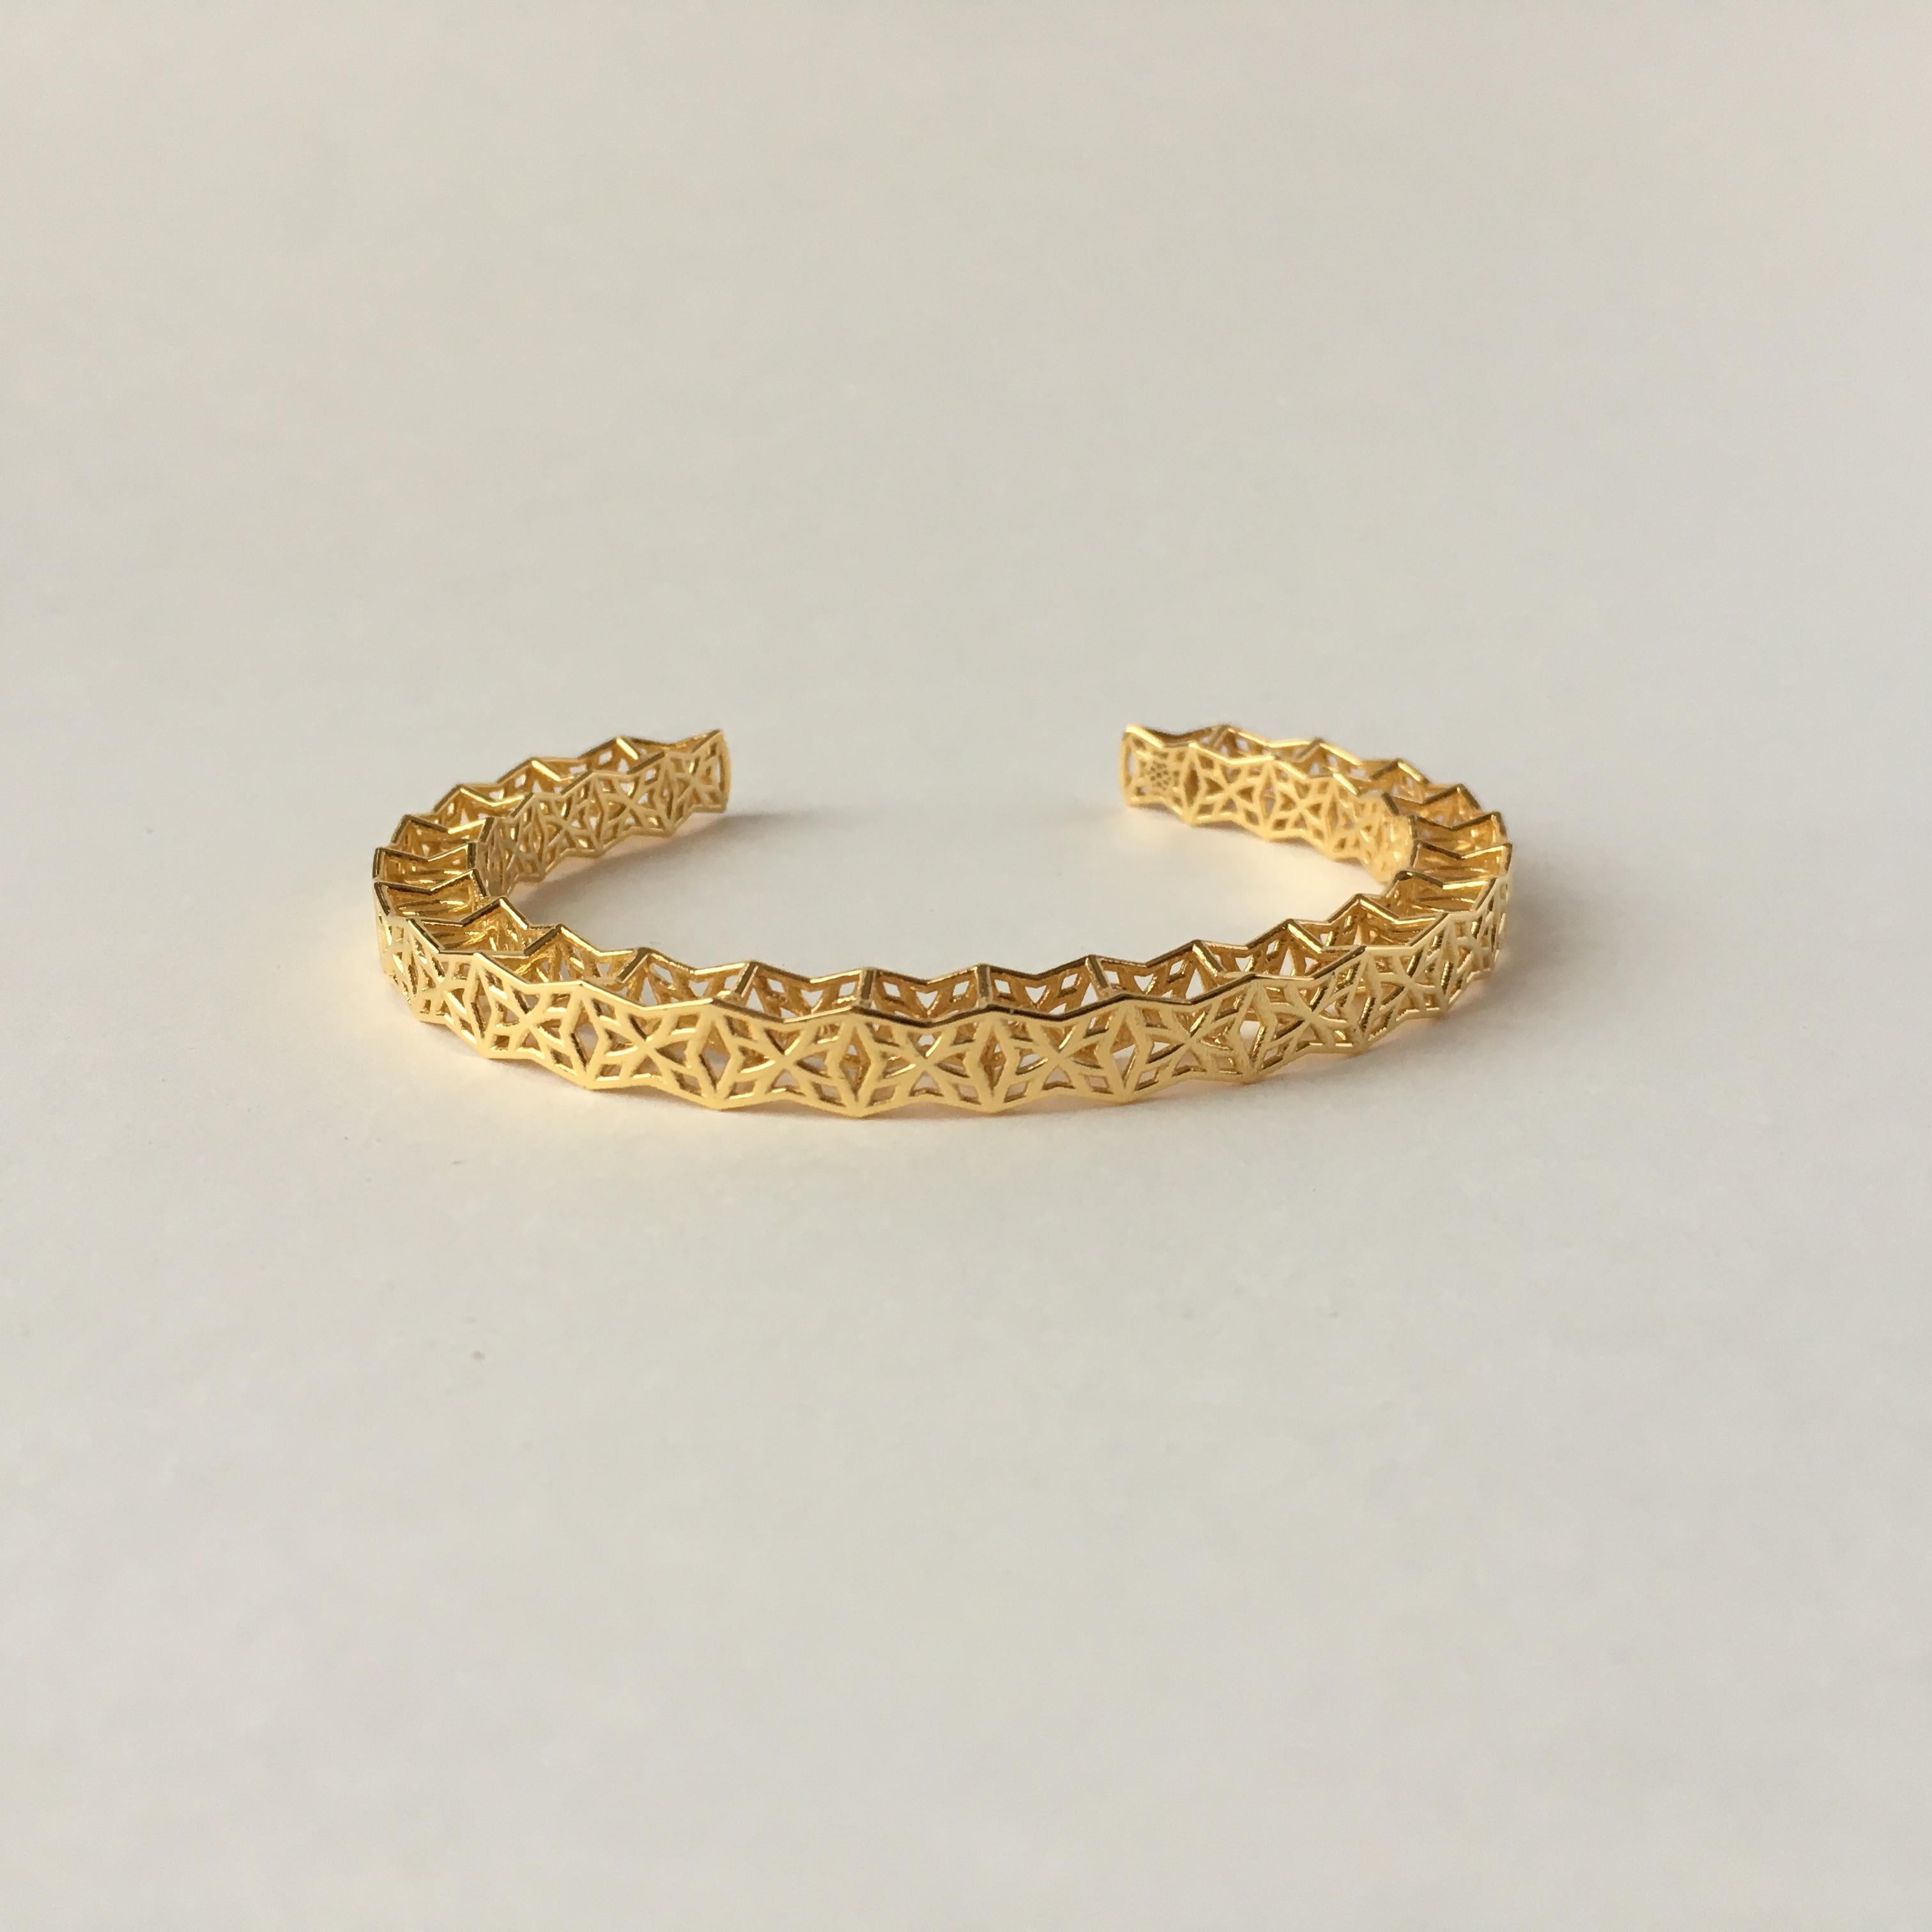 RANI BRACELET: Available on order in 18k yellow, withe, and rose gold.
Immerse yourself in a world of inspiration with our exquisite collection of jewelry, crafted to capture the opulence of Indian floral motifs and delicate pendants. Drawing from